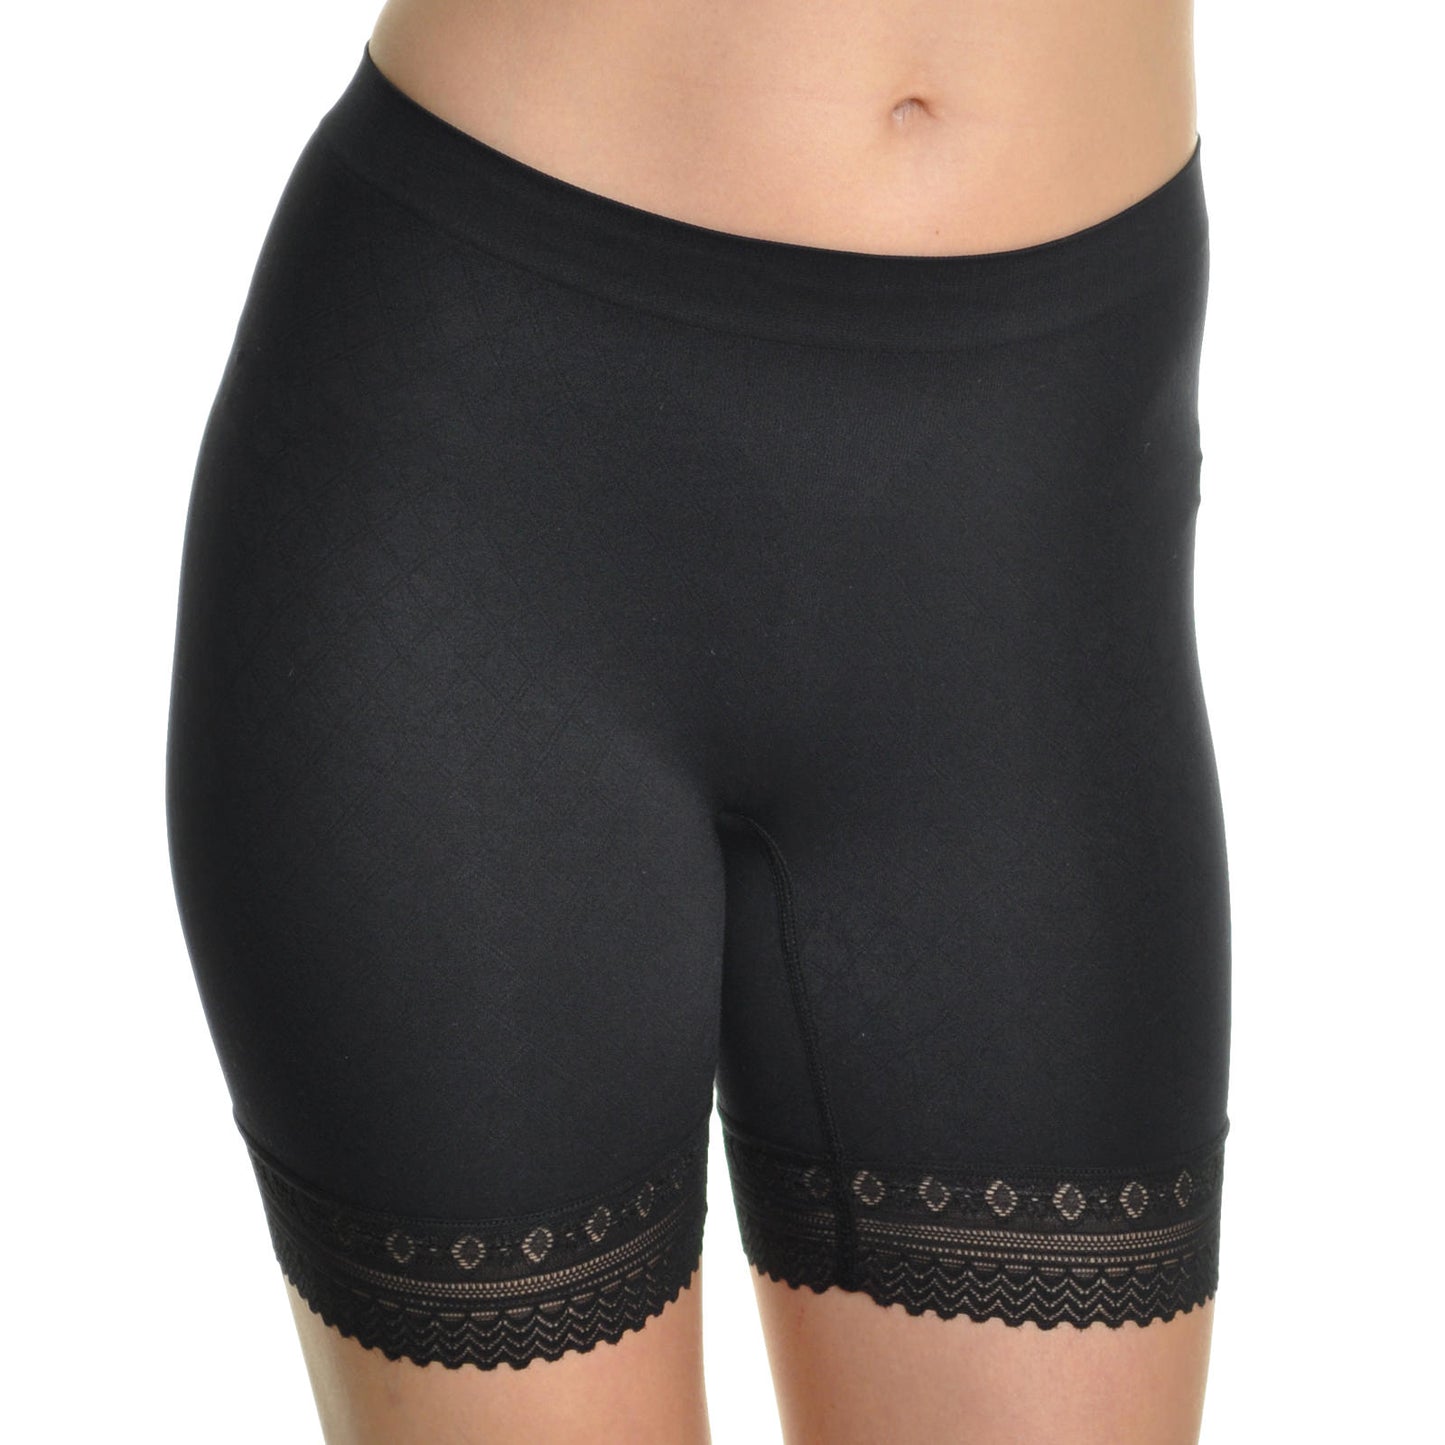 Seamless Safety Shorts With Lace Trim (6-Pack)